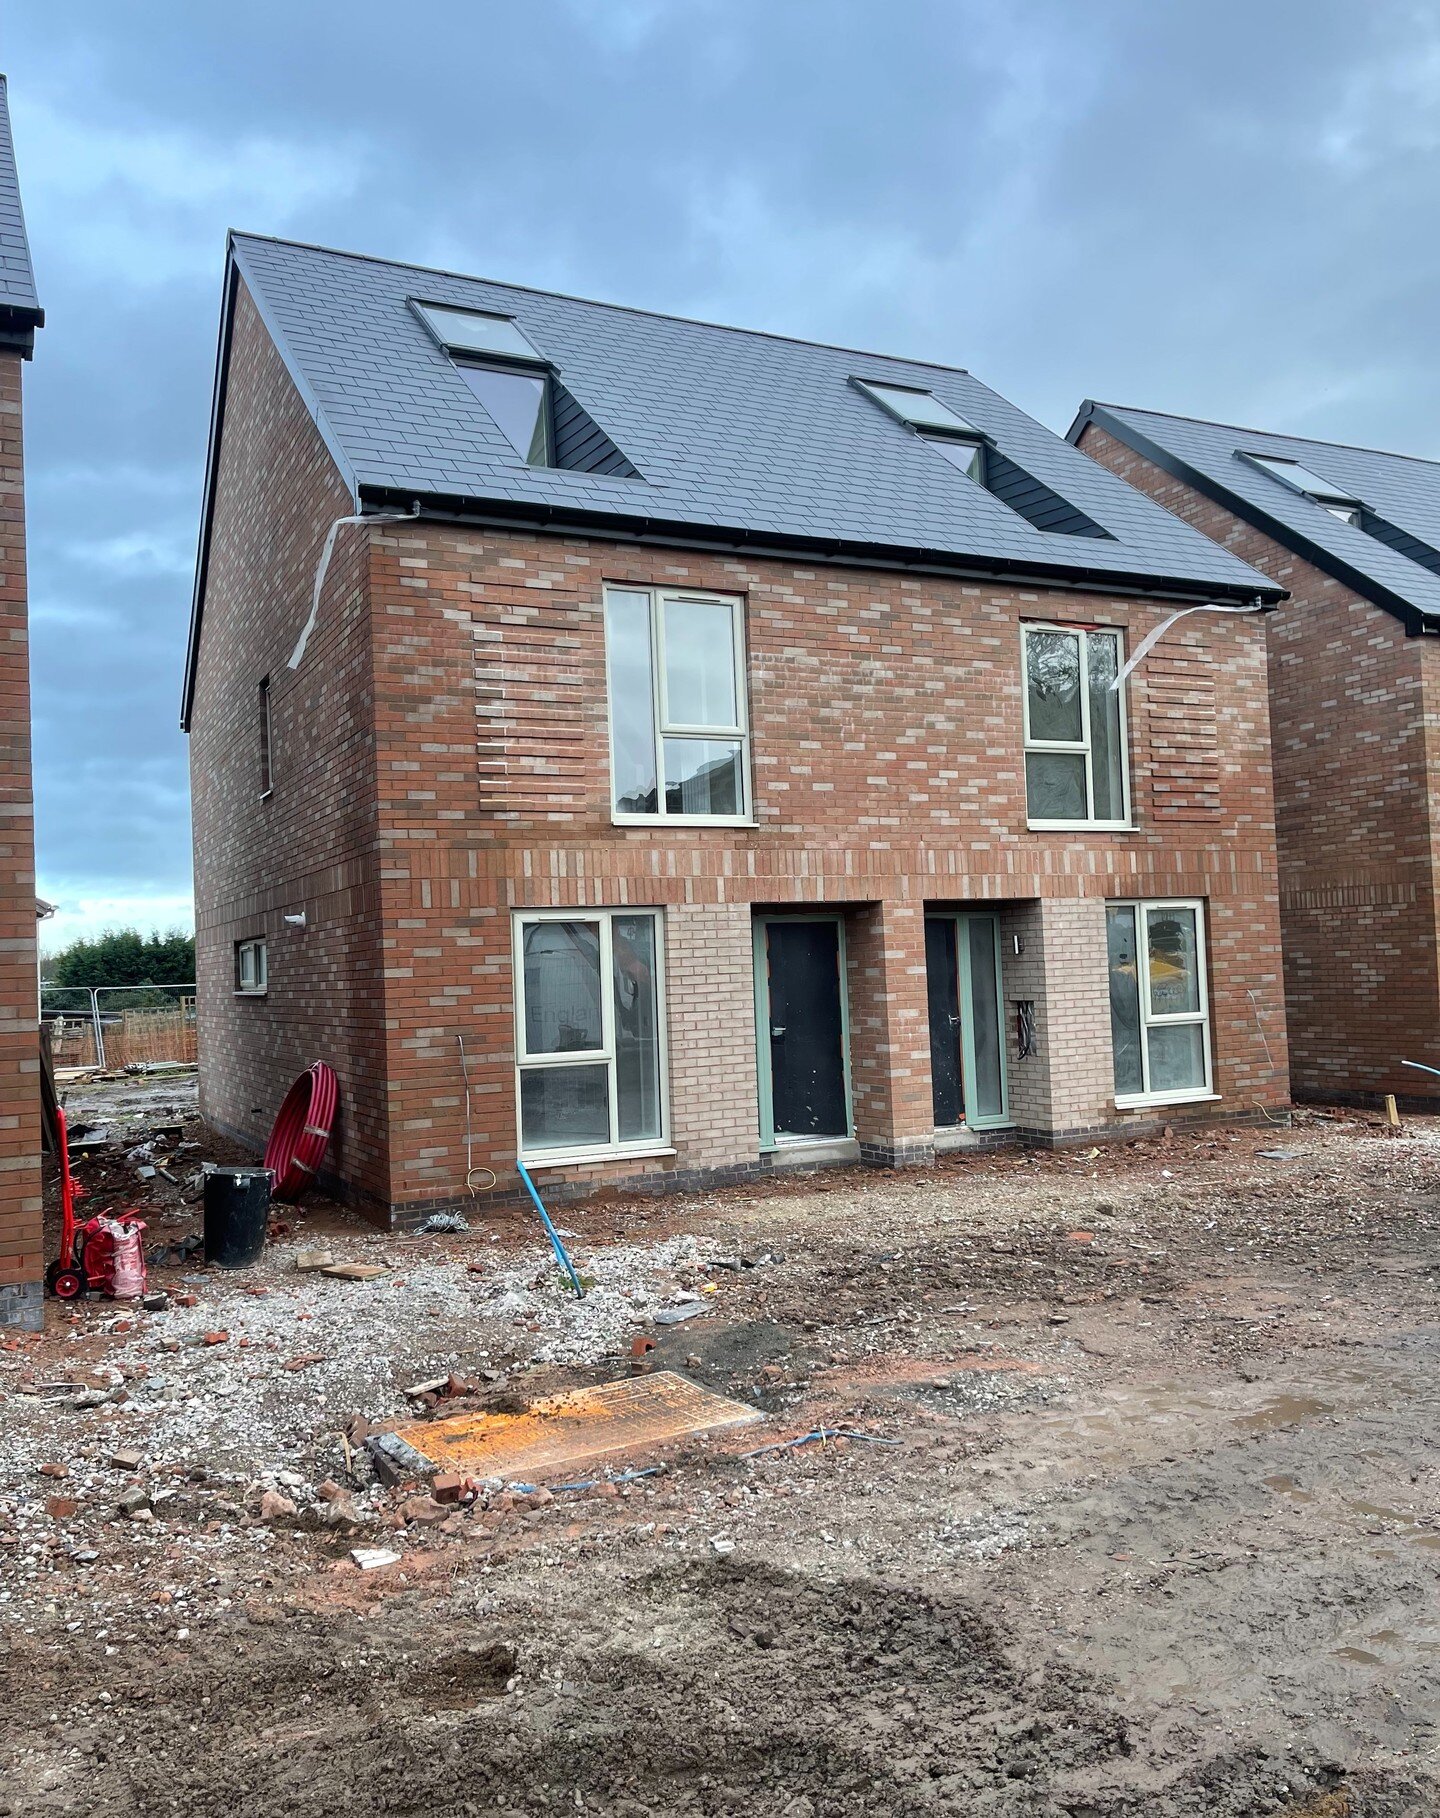 U N S W O R T H &bull; S O C I A L &bull; C L U B

Despite the bad weather, works are progressing well at our redevelopment site in Whitefield, as we near completion. Scaffold dismantling and brickwork is complete. Decoration and internal finishes ar